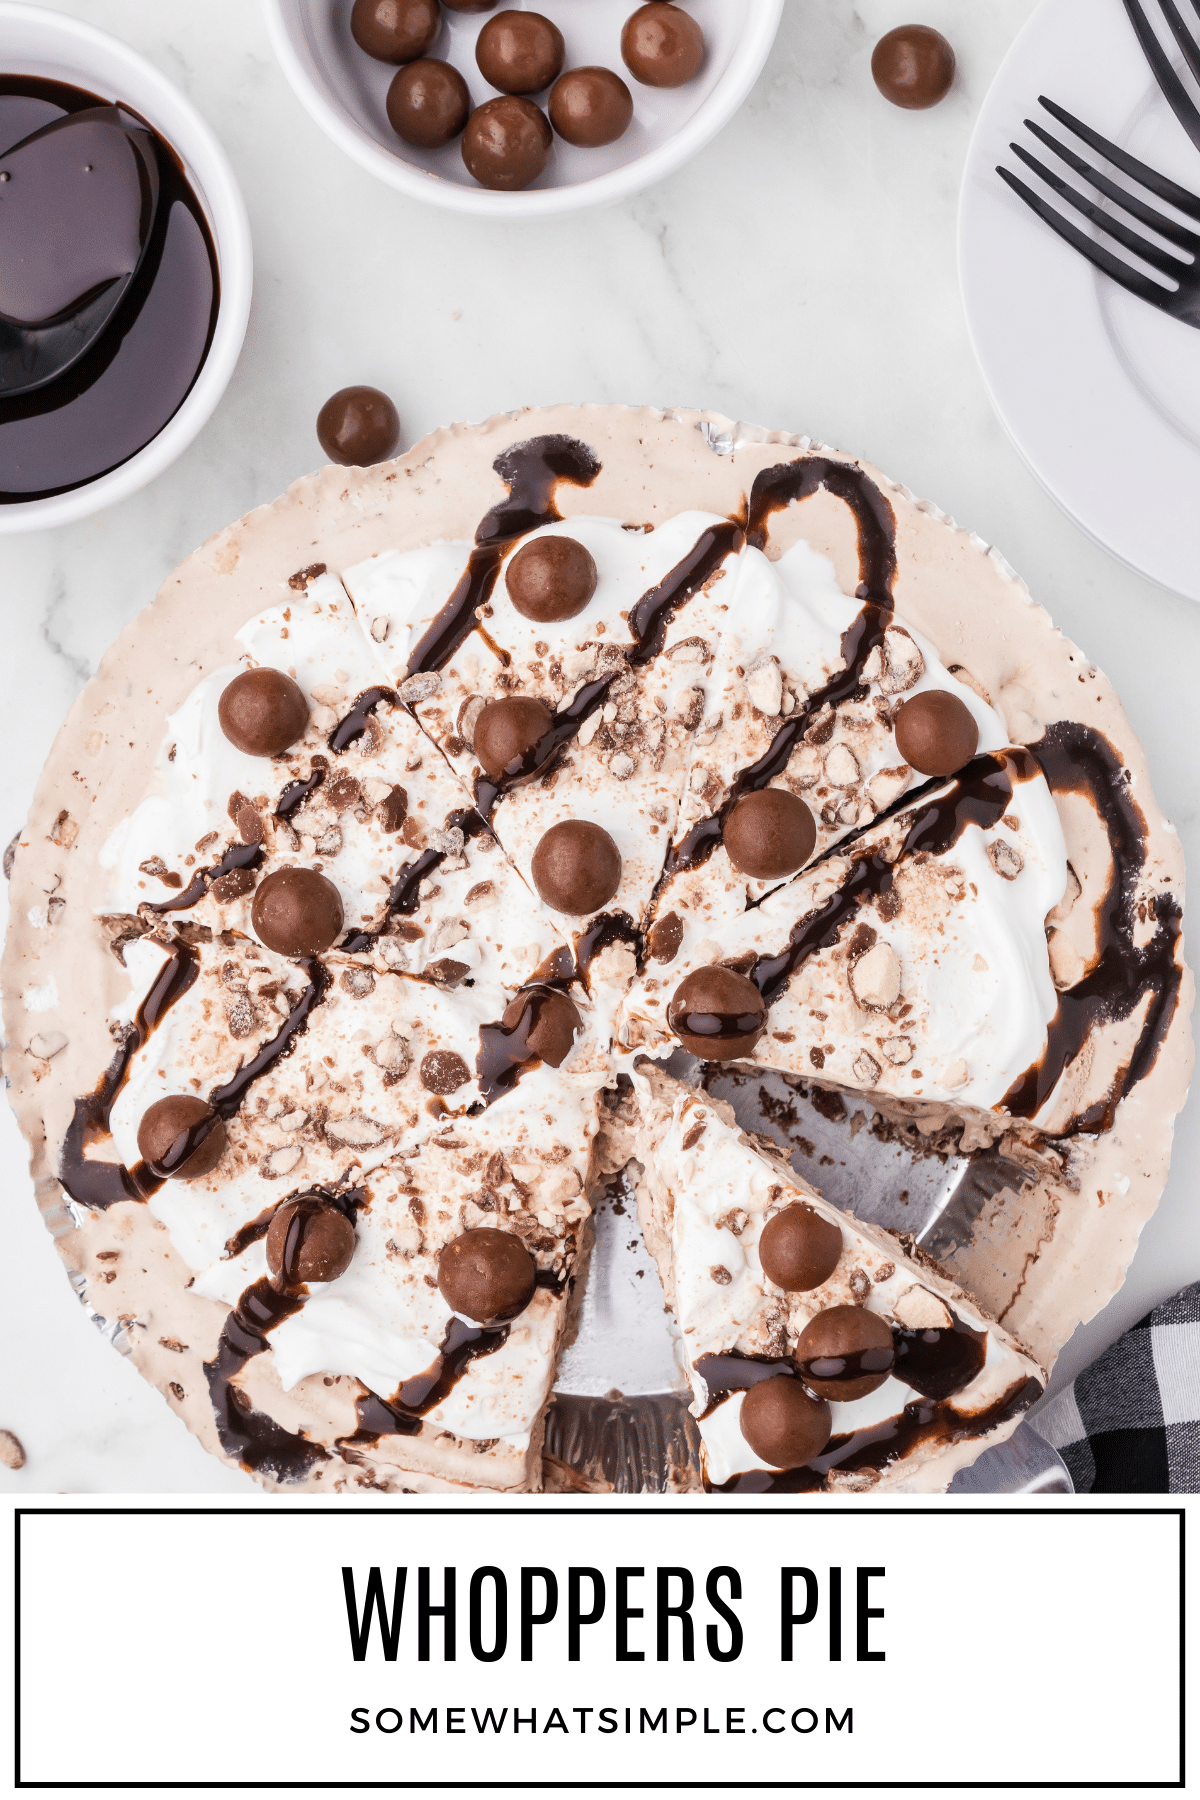 An easy no-bake ice cream whopper pie is the perfect creamy chilled dessert to serve all summer long! Made with two kinds of ice cream, whipped topping, and Whopper malted milk balls, this fun ice cream pie is as impressive to look at as it is easy to make! via @somewhatsimple